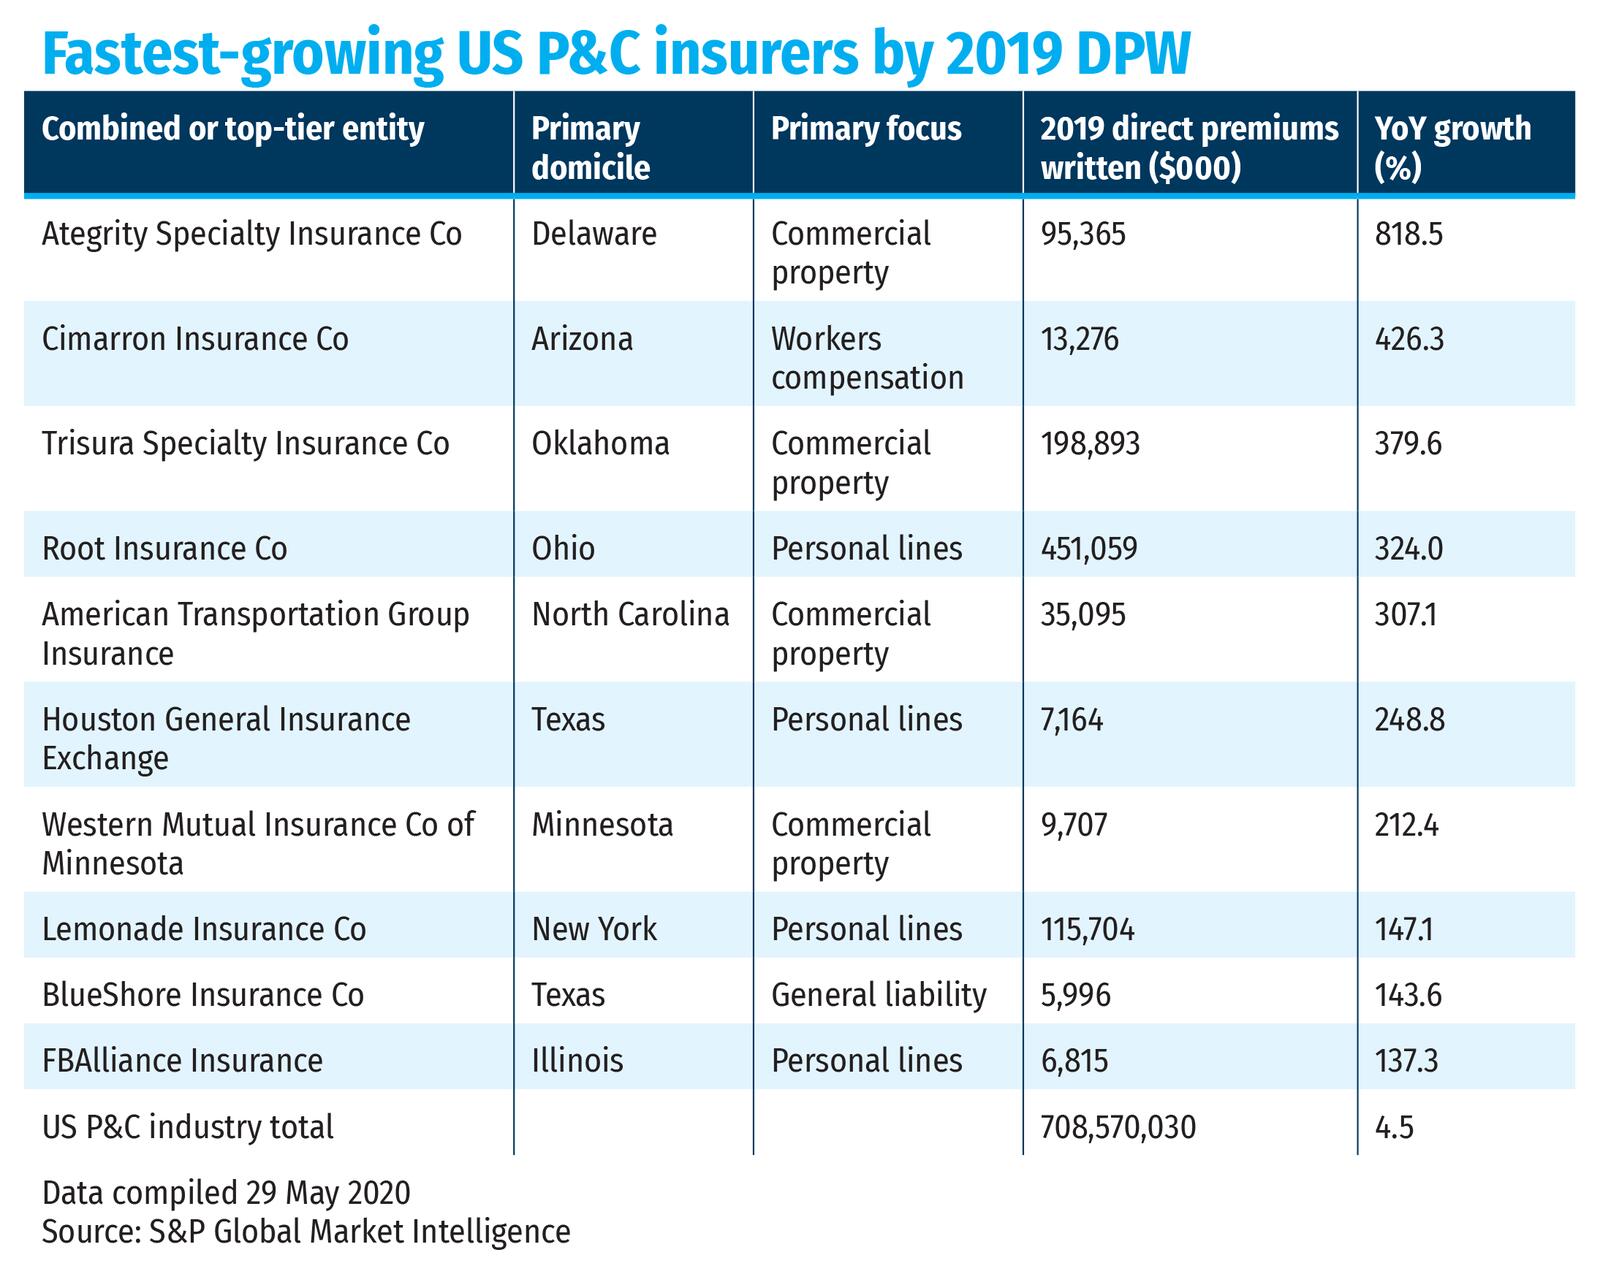 Fastest-growing US P&C insurers by 2019 DPW